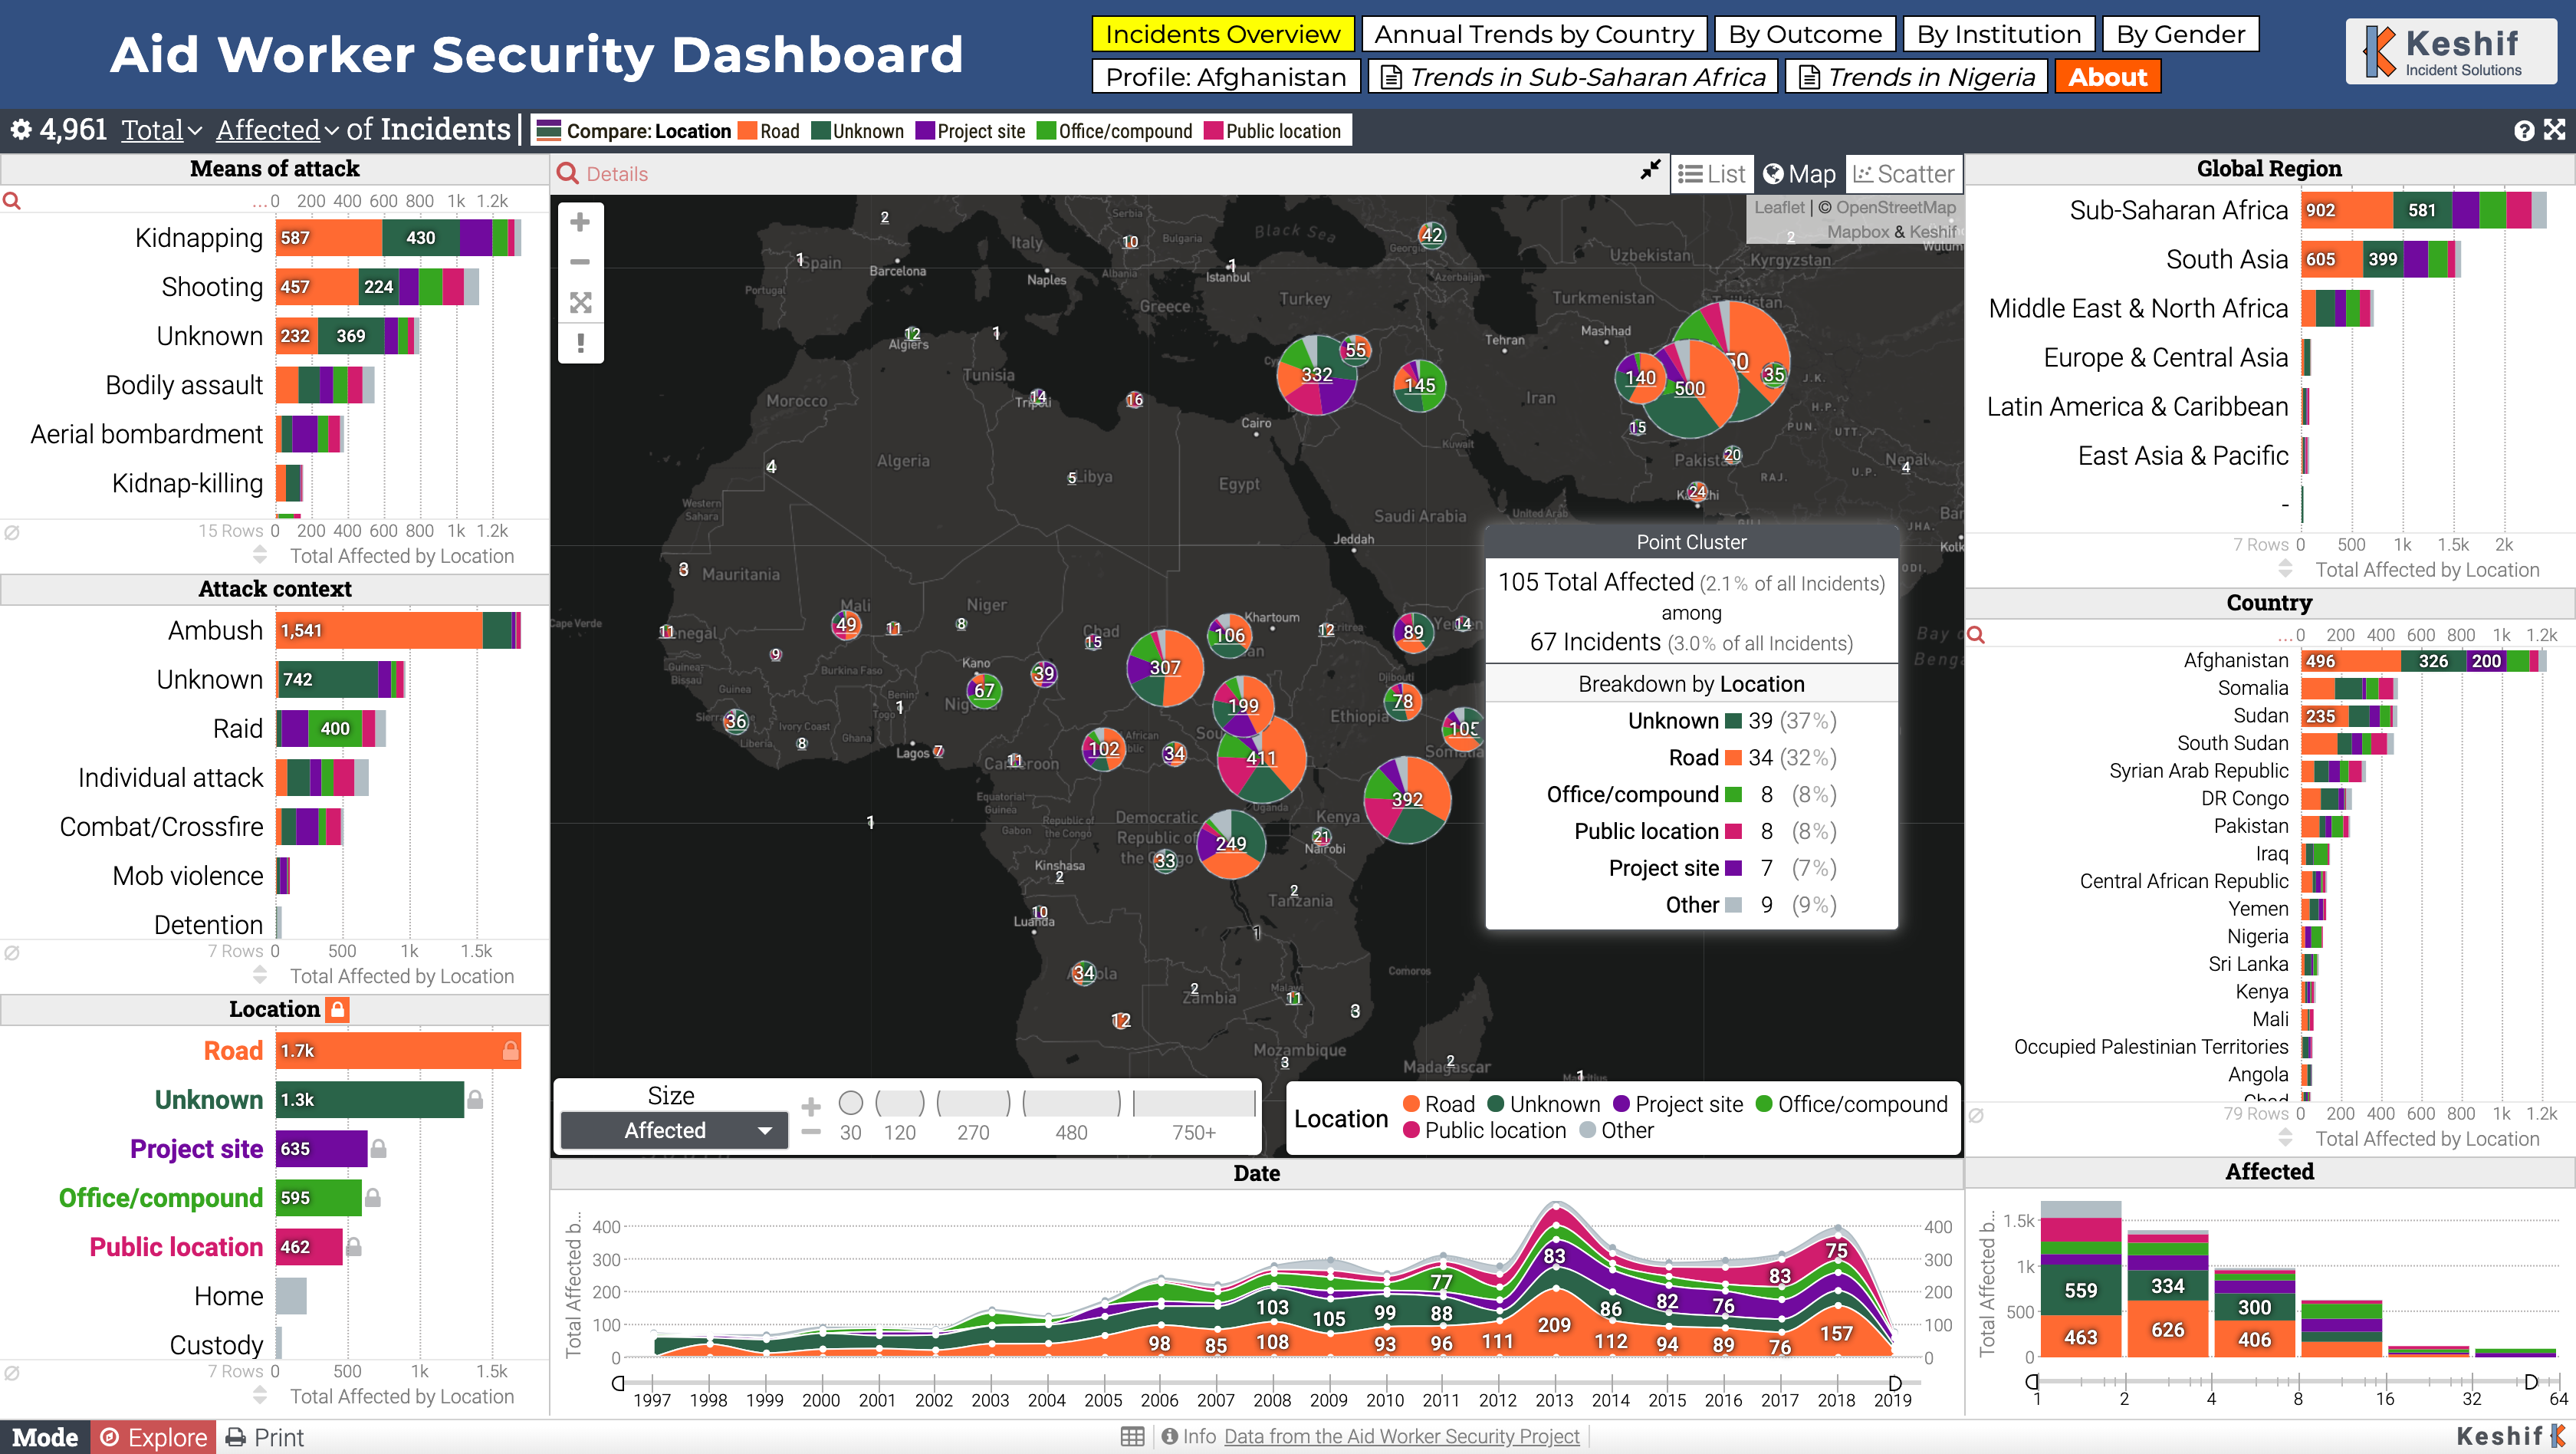 Aid Worker Security Incidents Analysis Dashboard (https://gallery.keshif.me/AidWorkerSecurity)